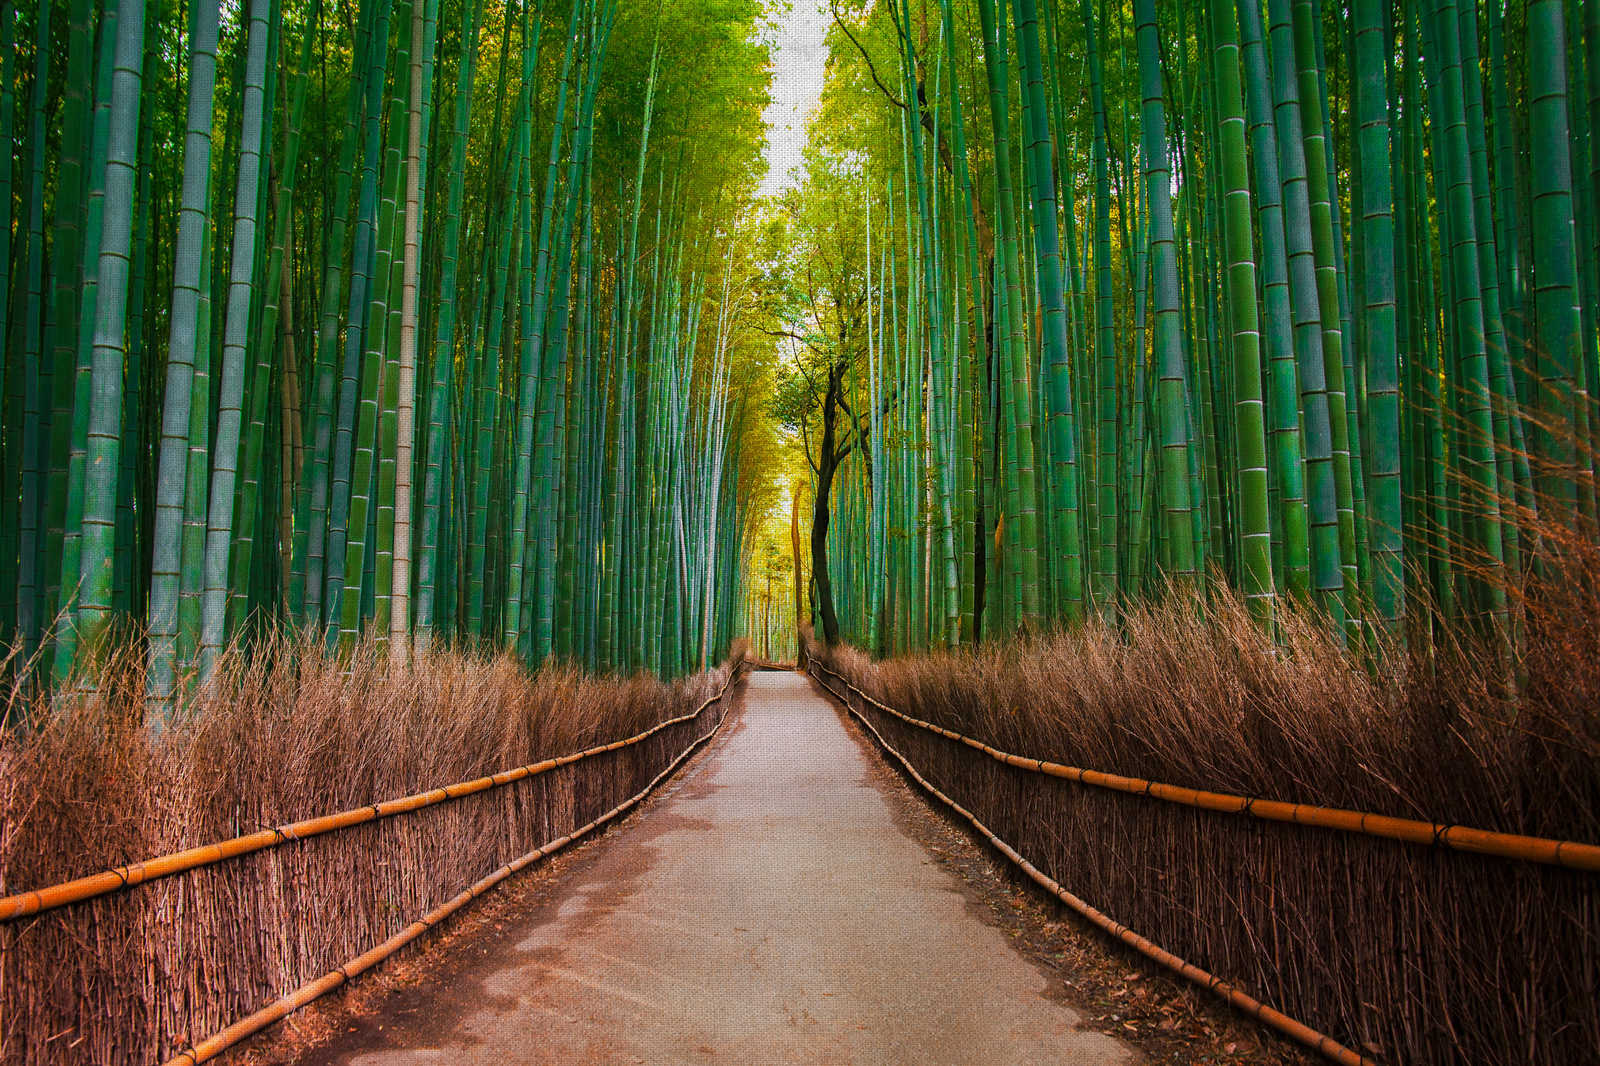             Canvas with natural bamboo path - 0.90 m x 0.60 m
        